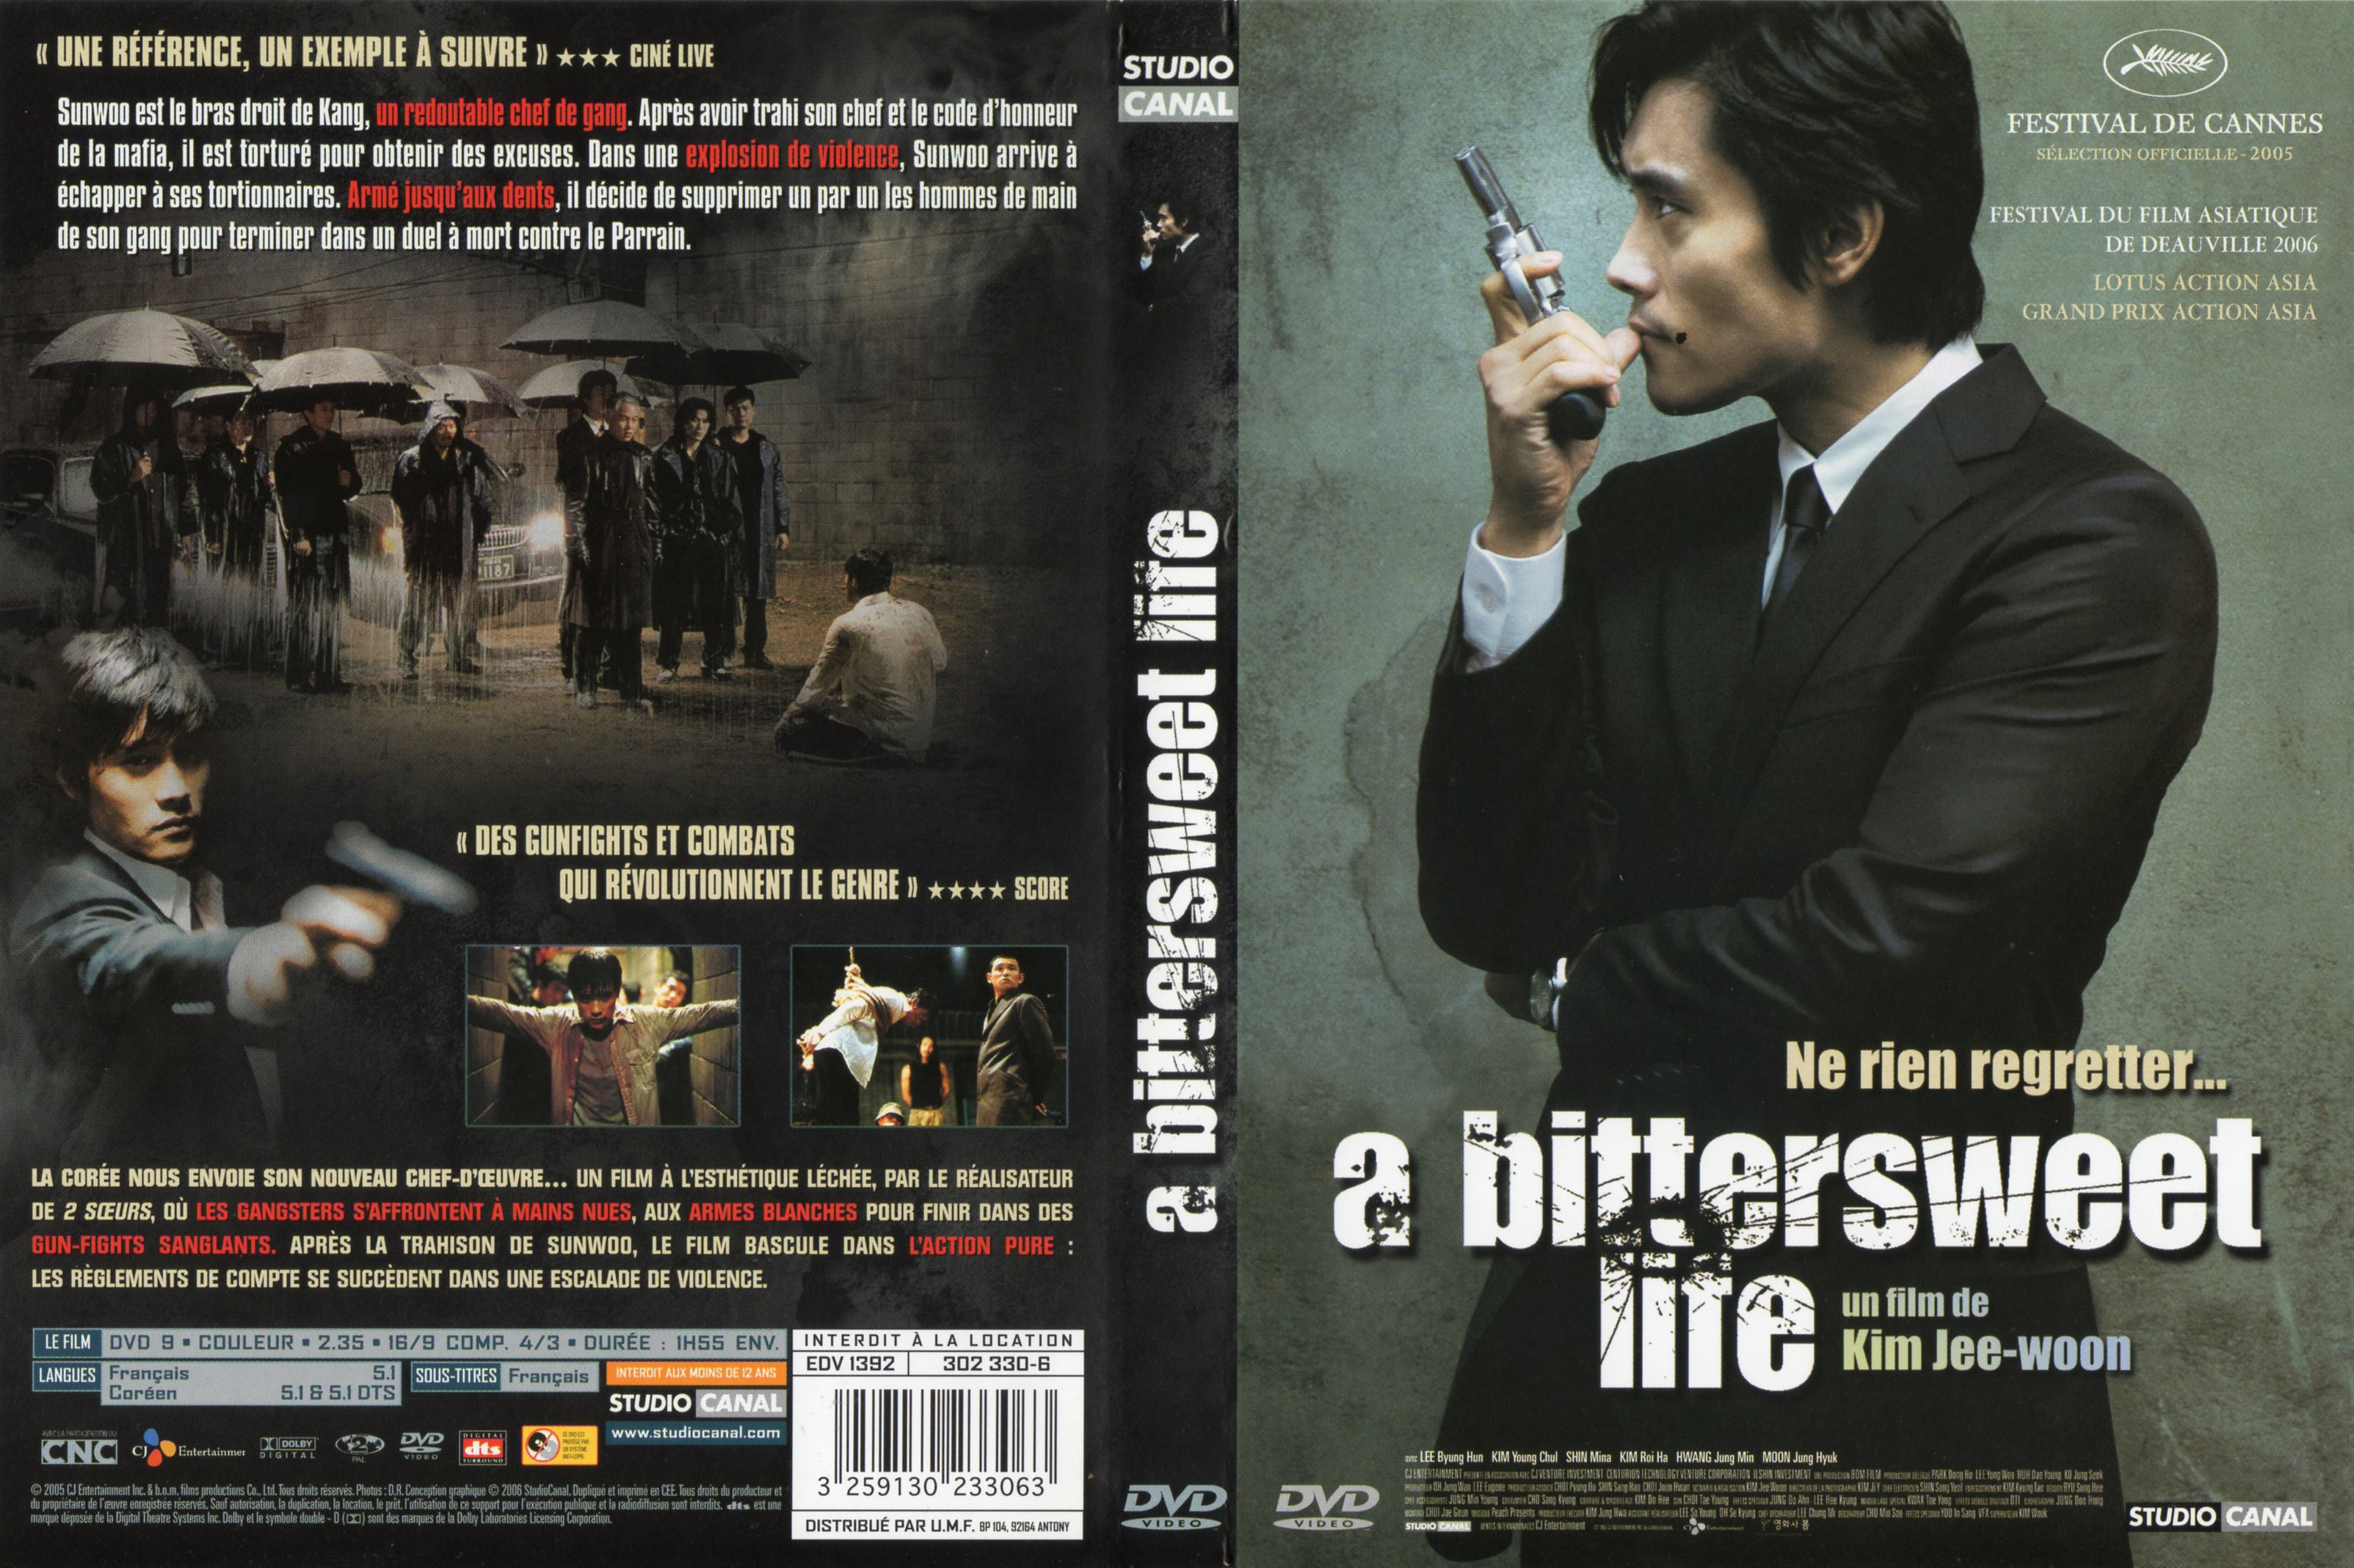 Jaquette DVD A bittersweet life